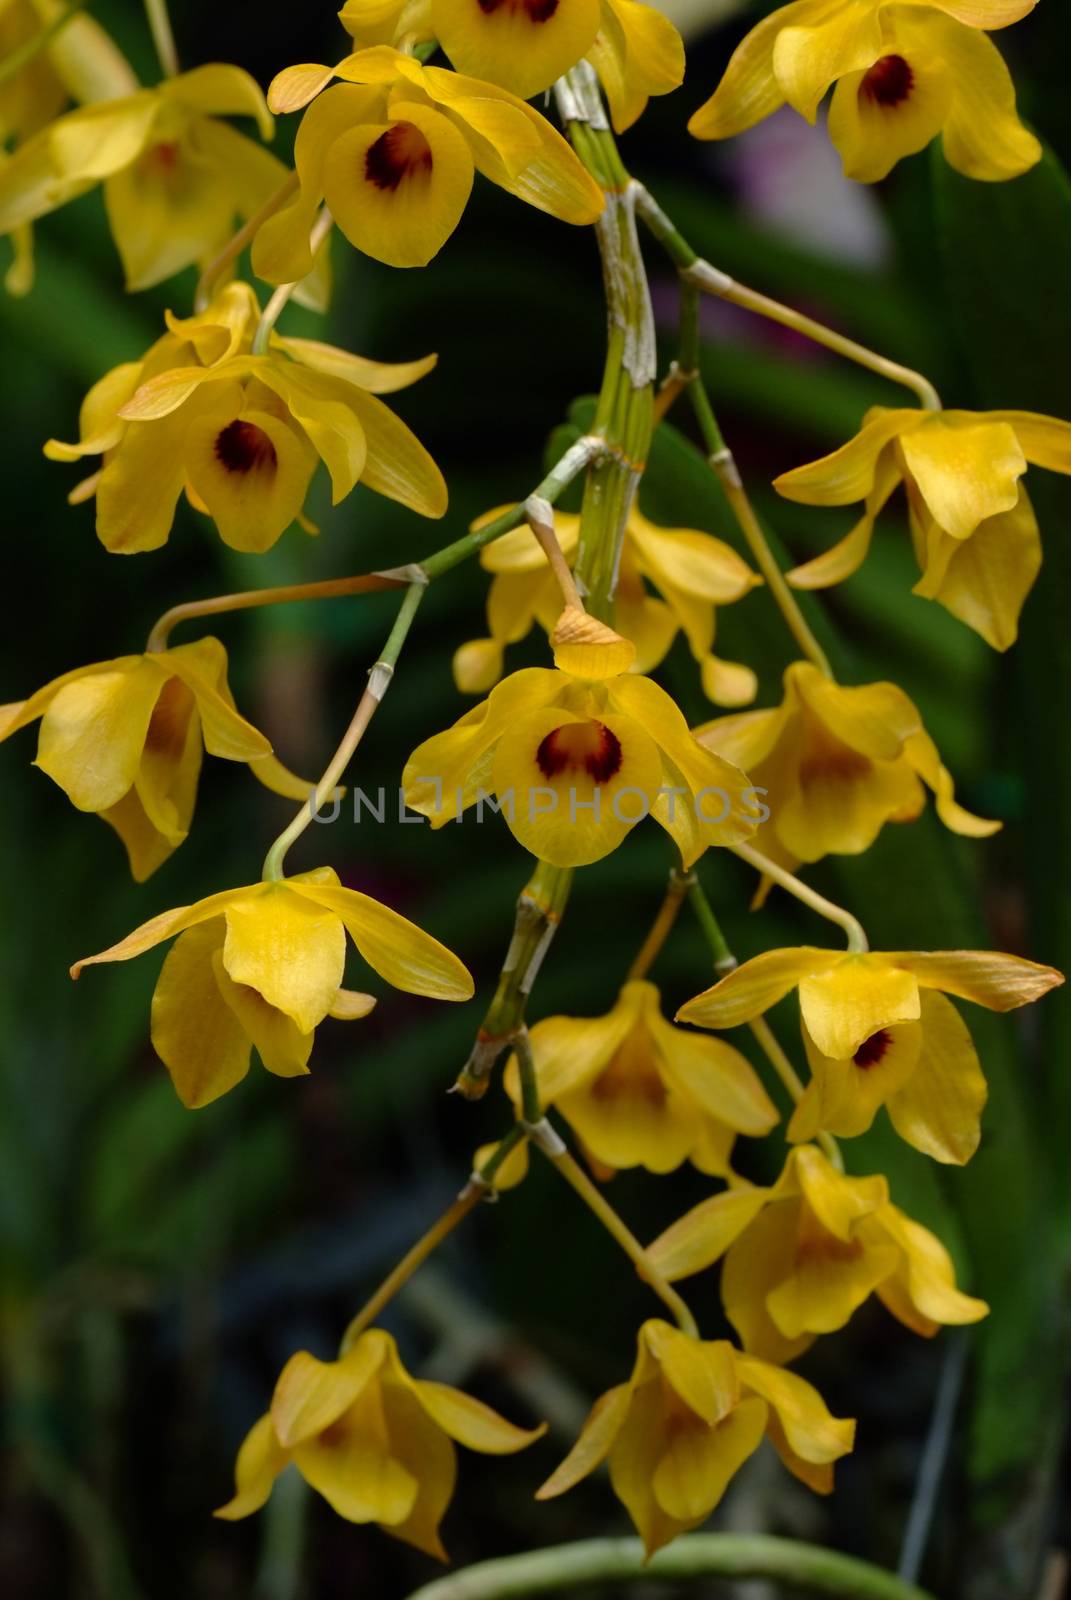 Dendrobium densiflorum,  is a species of epiphytic or lithophytic orchid that is native to Asia by ideation90